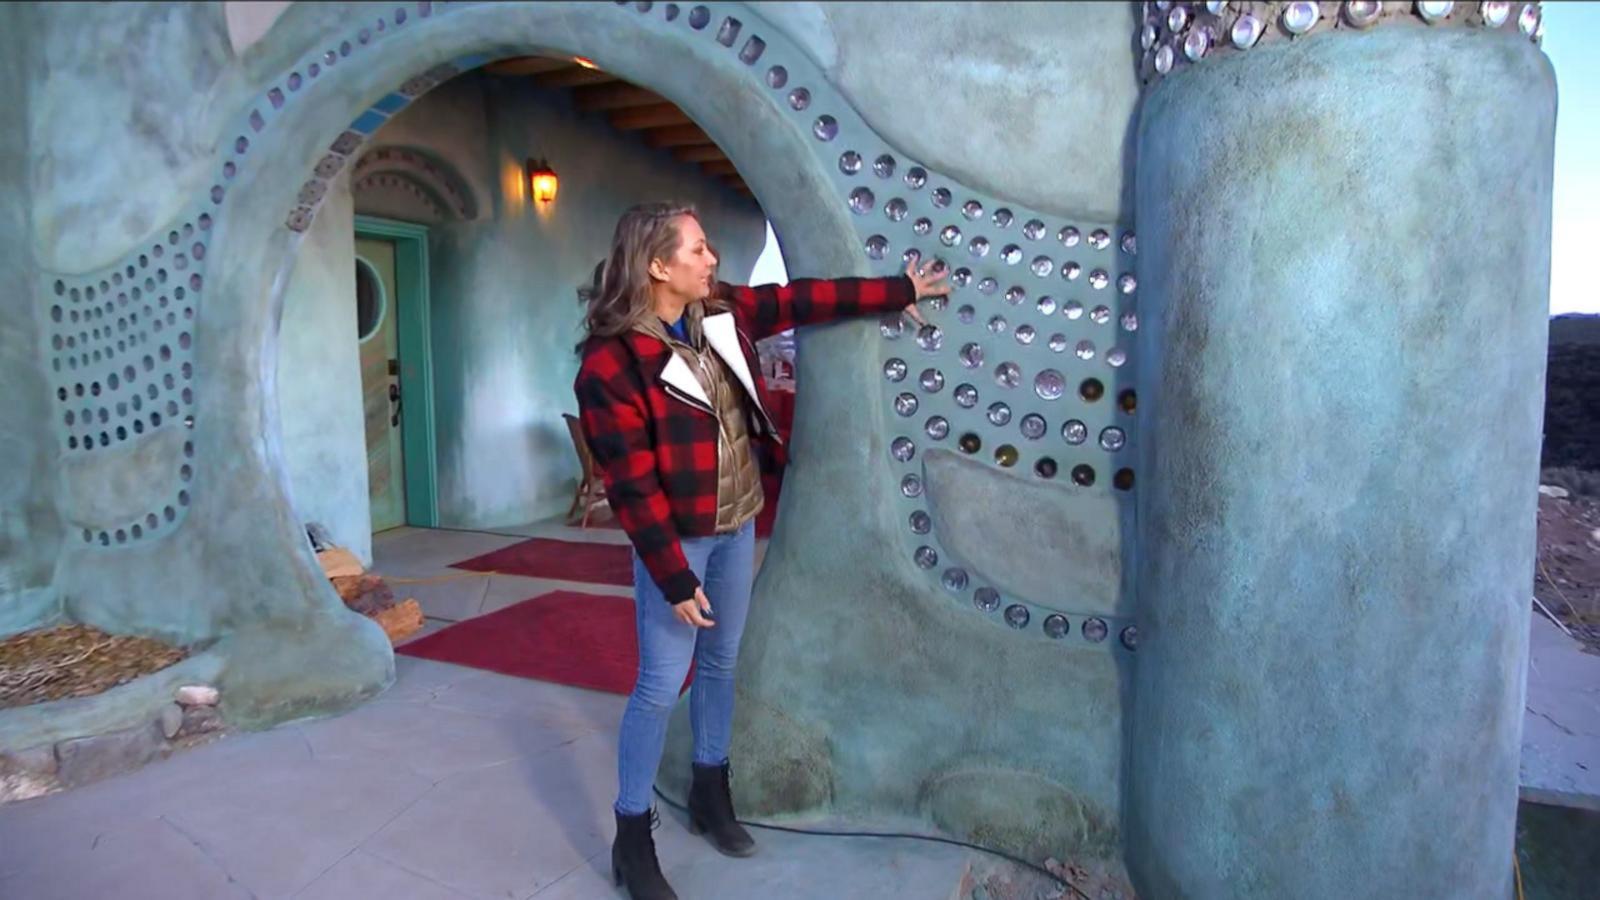 VIDEO: How an 'Earthship' can reduce greenhouse gas emissions